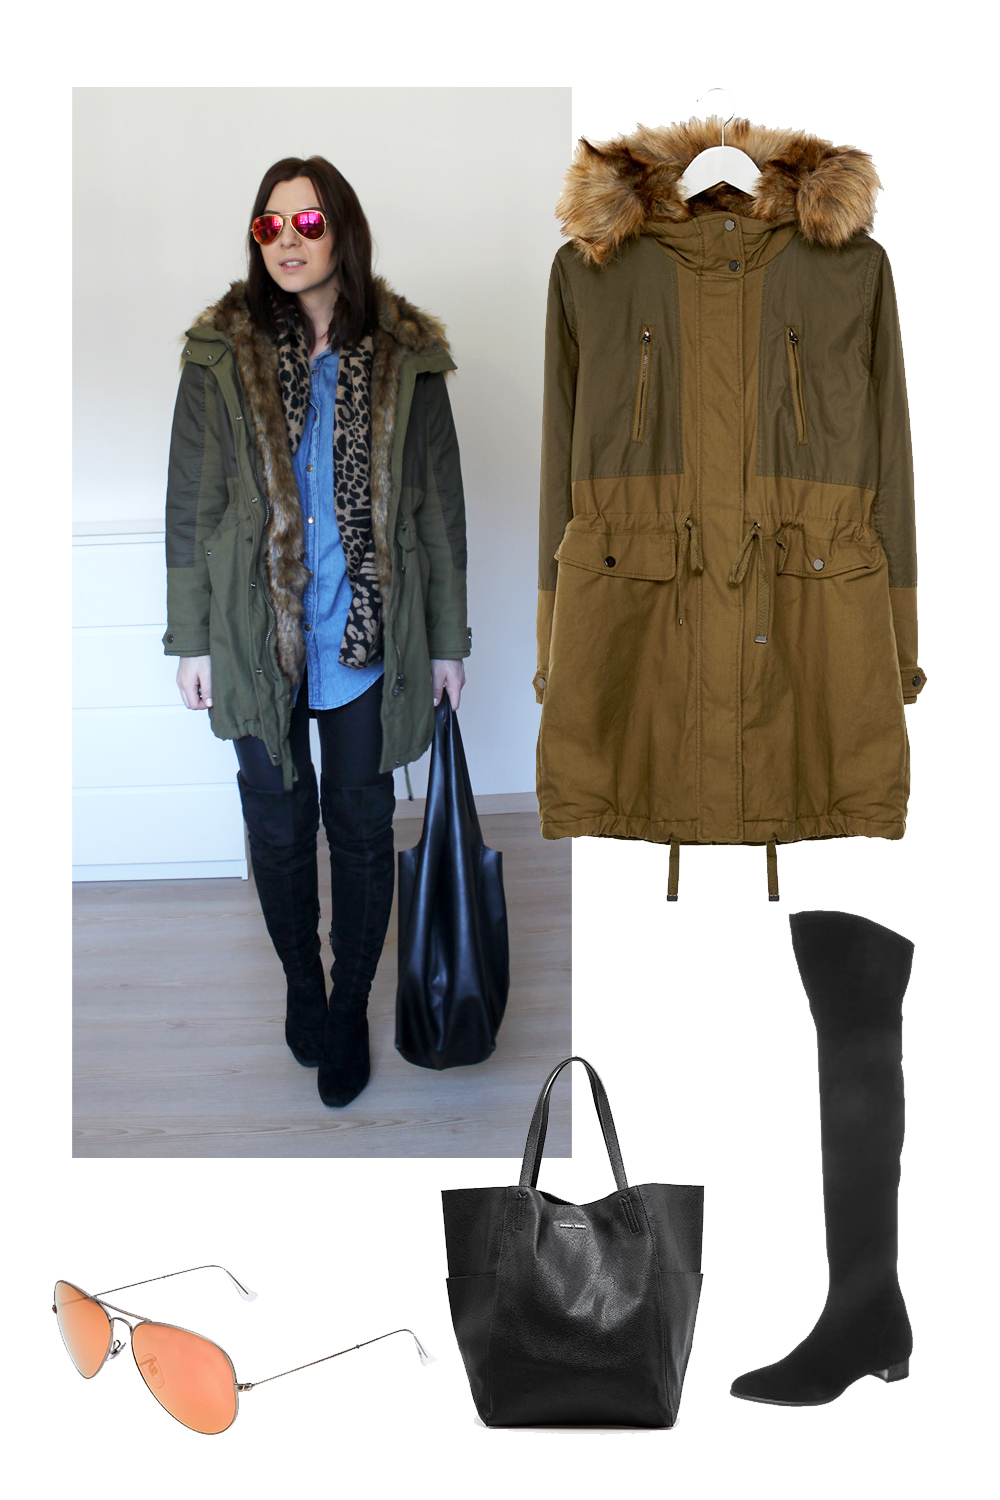 who is mocca, fashionblog tirol, fashionblog österreich, weekly outfit review, xl schal senfgelb rost asos, over knee stifle H&M Trend, over knee boots, beuteltasche, jeanshemd, parka topshop zalando khaki